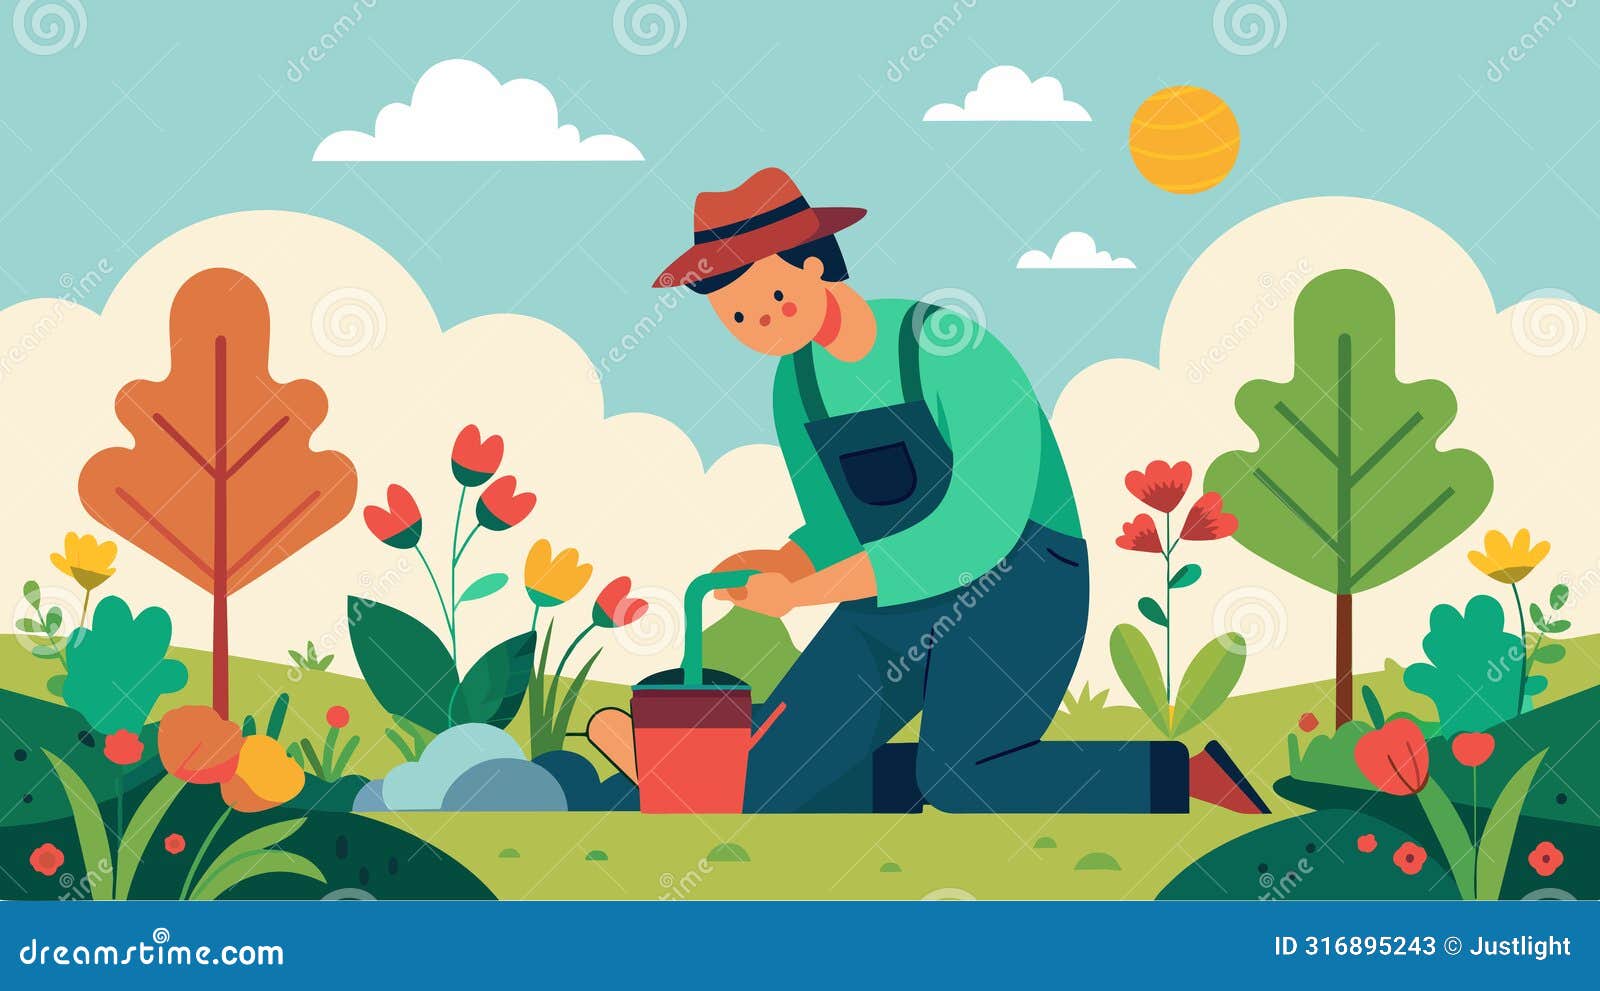 a gardener with adhd tending to their flourishing garden channeling their tered energy into organizing and ing the